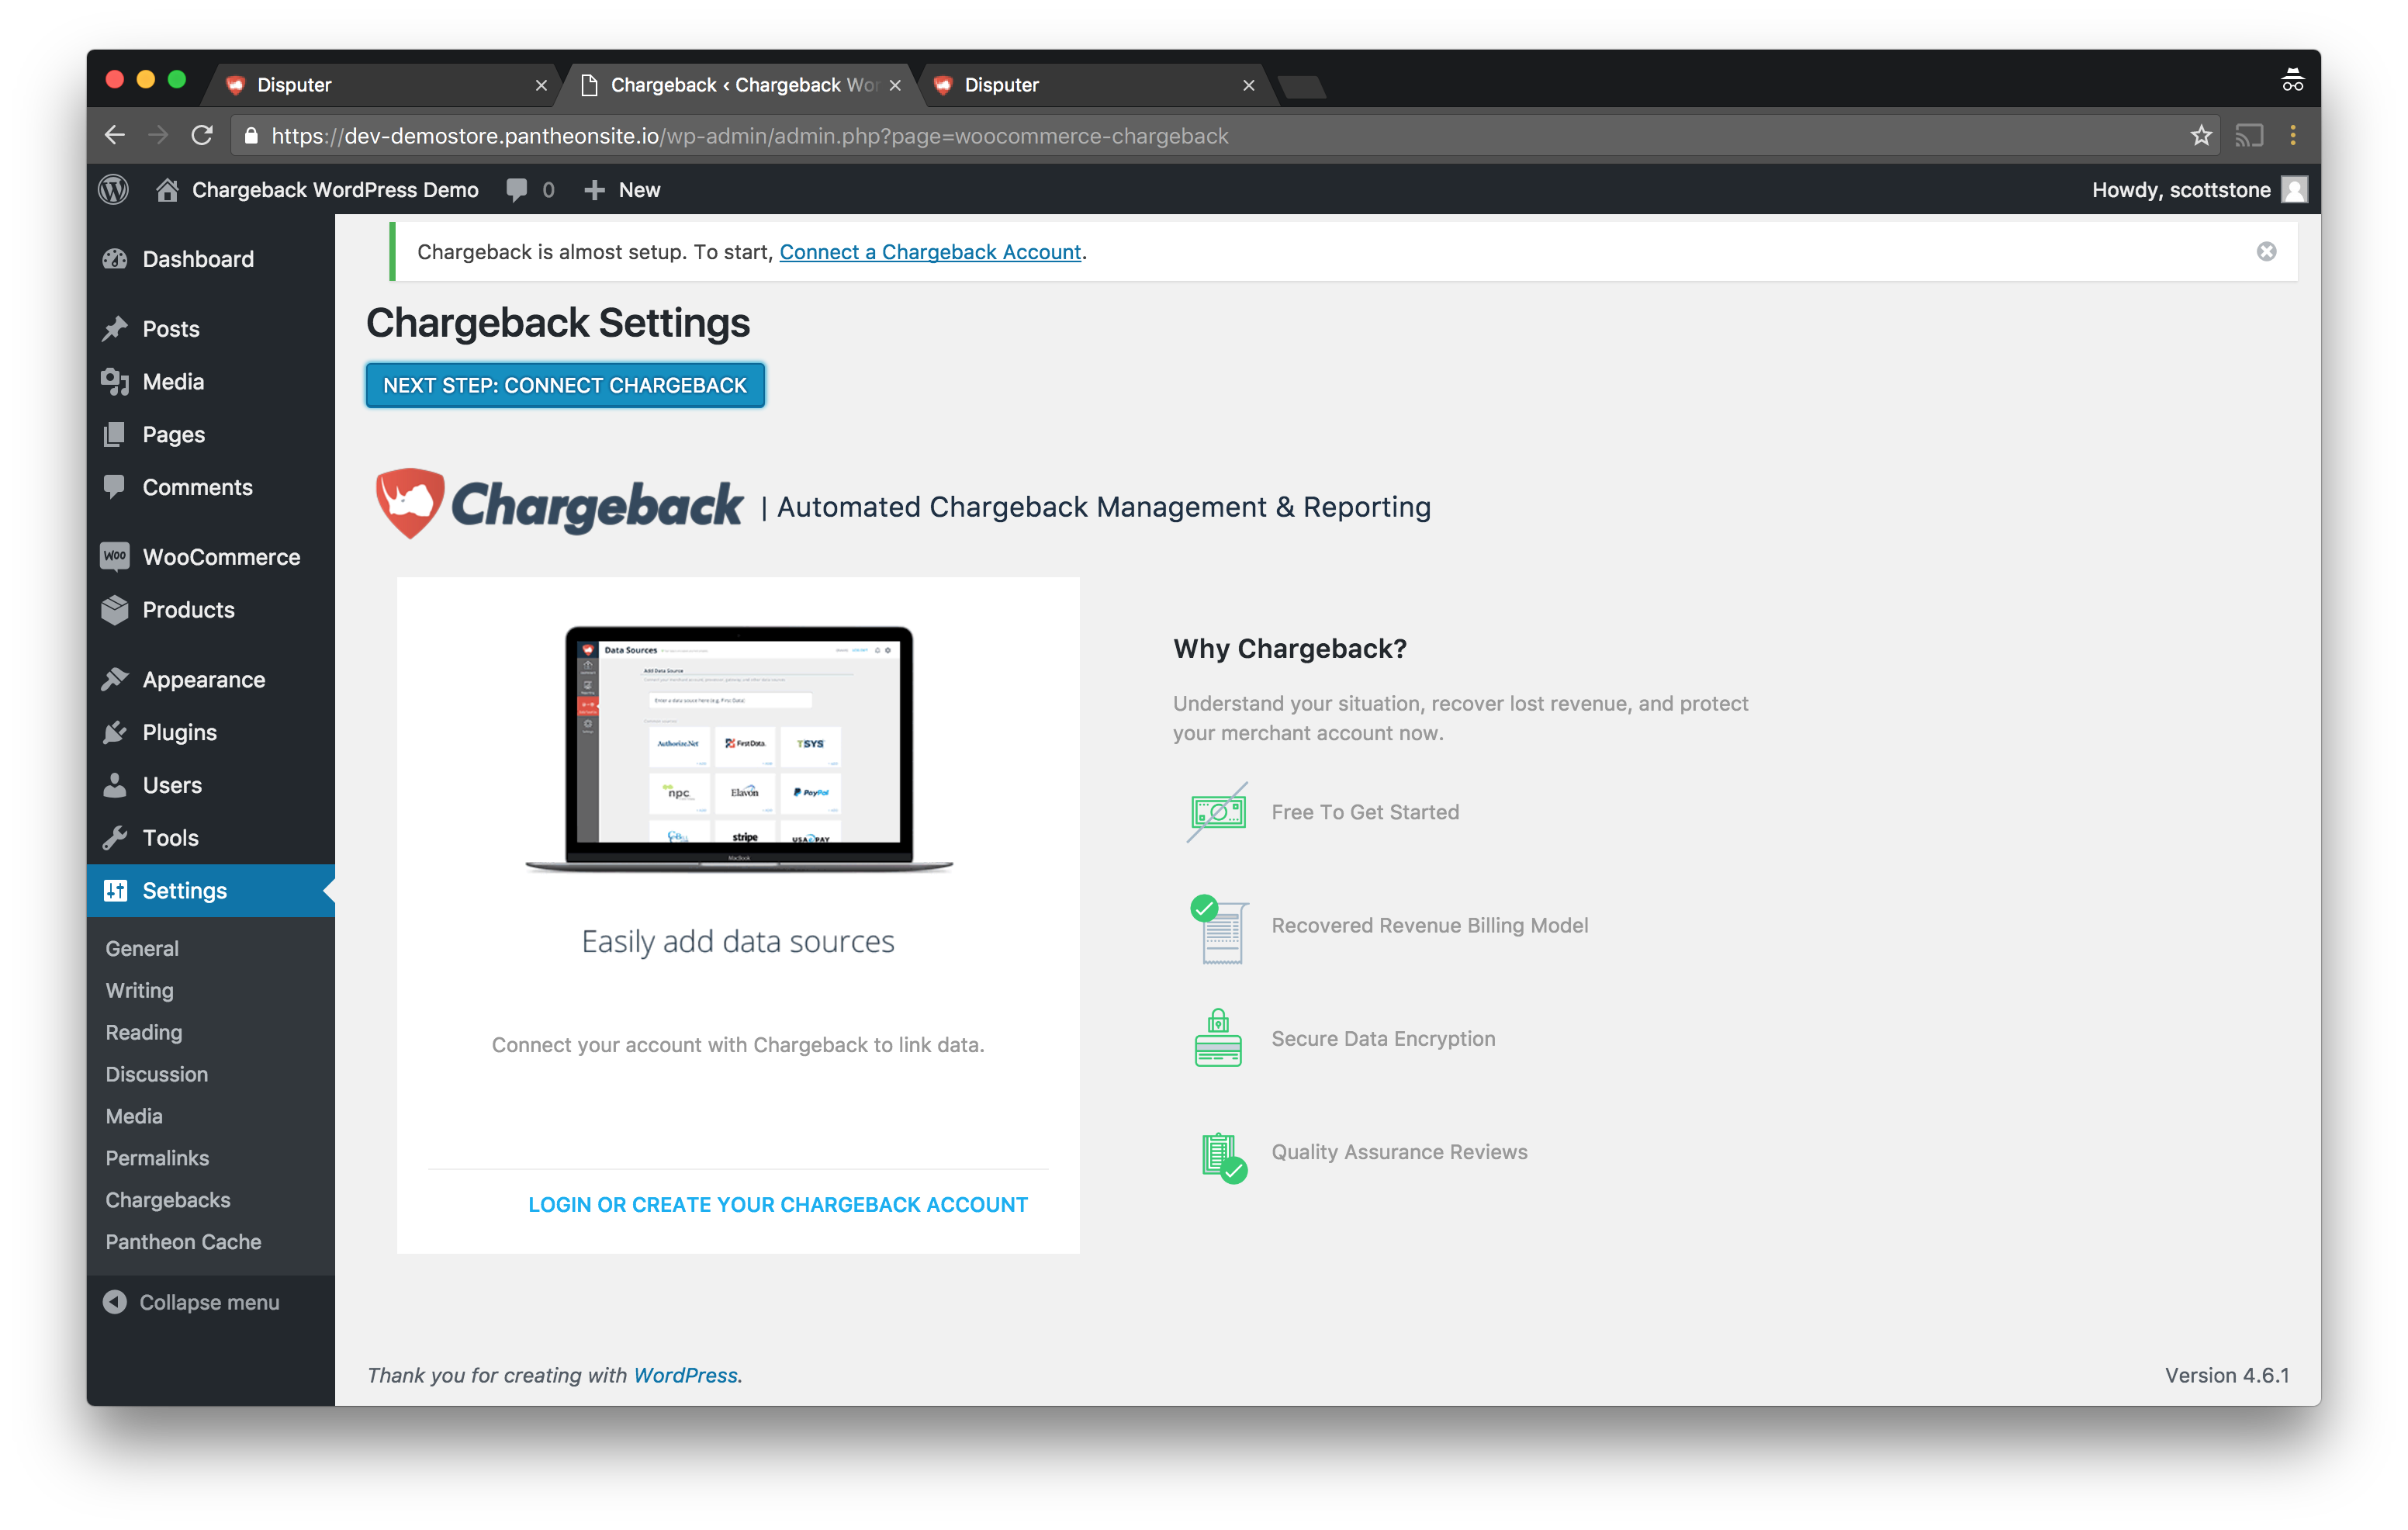 Connect your Chargeback Account